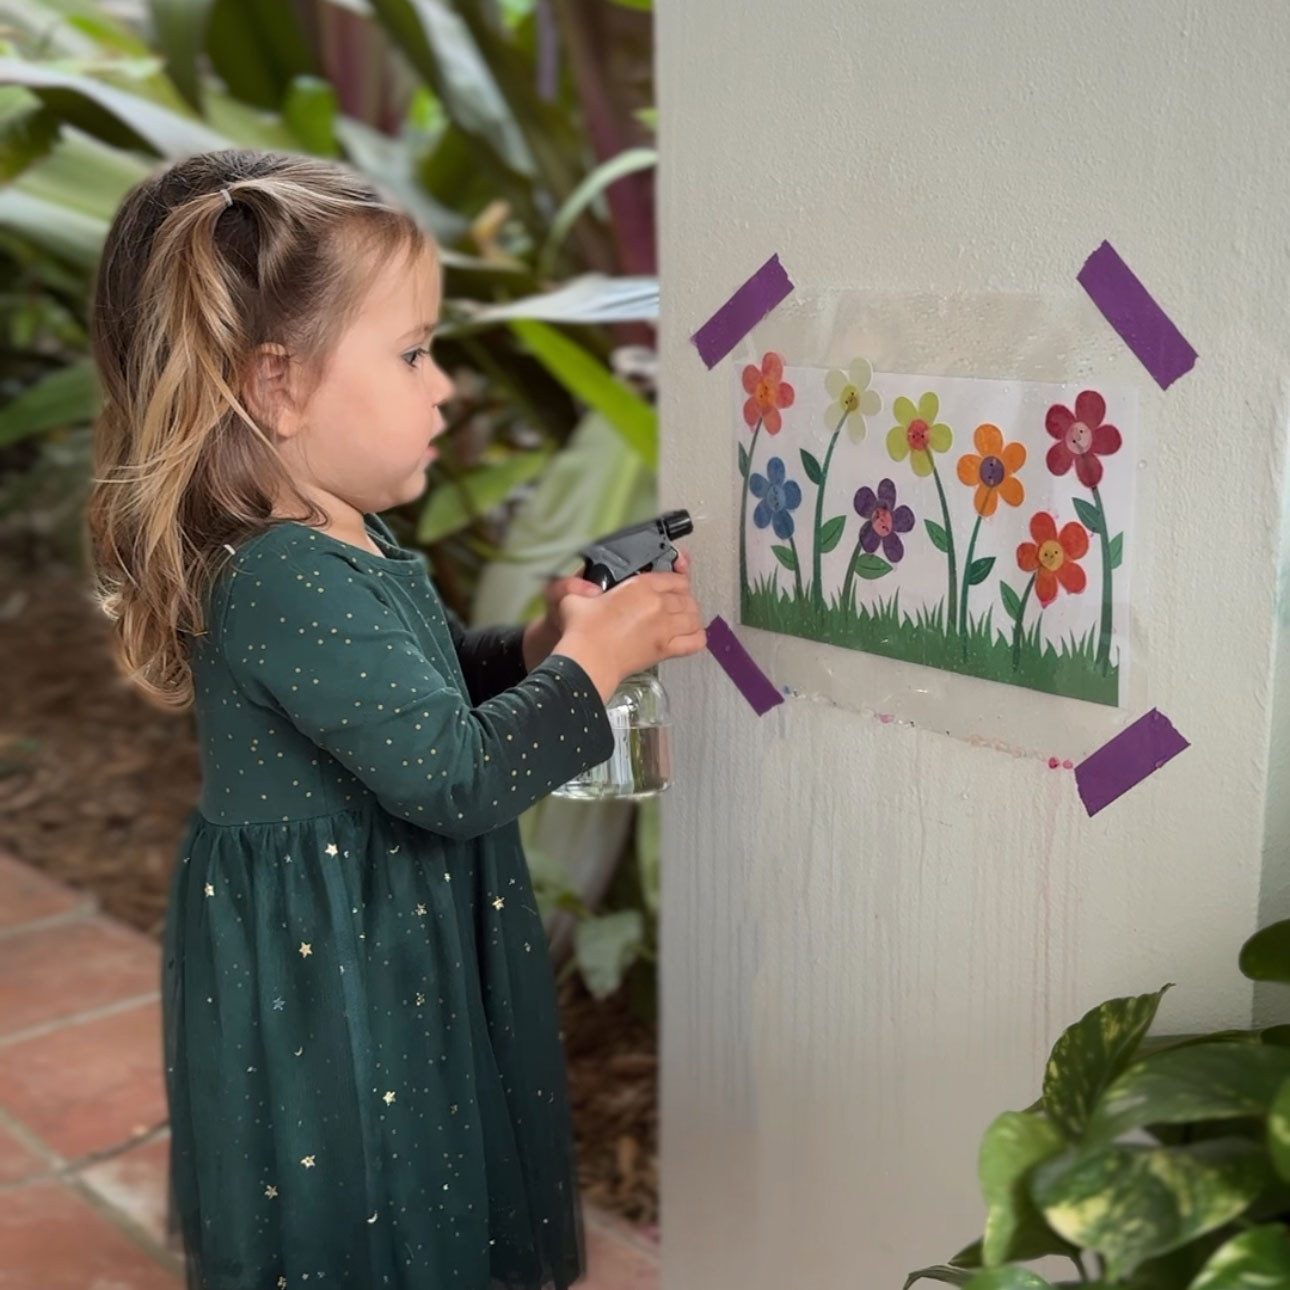 Flower Activity for Preschoolers with Free Printable!